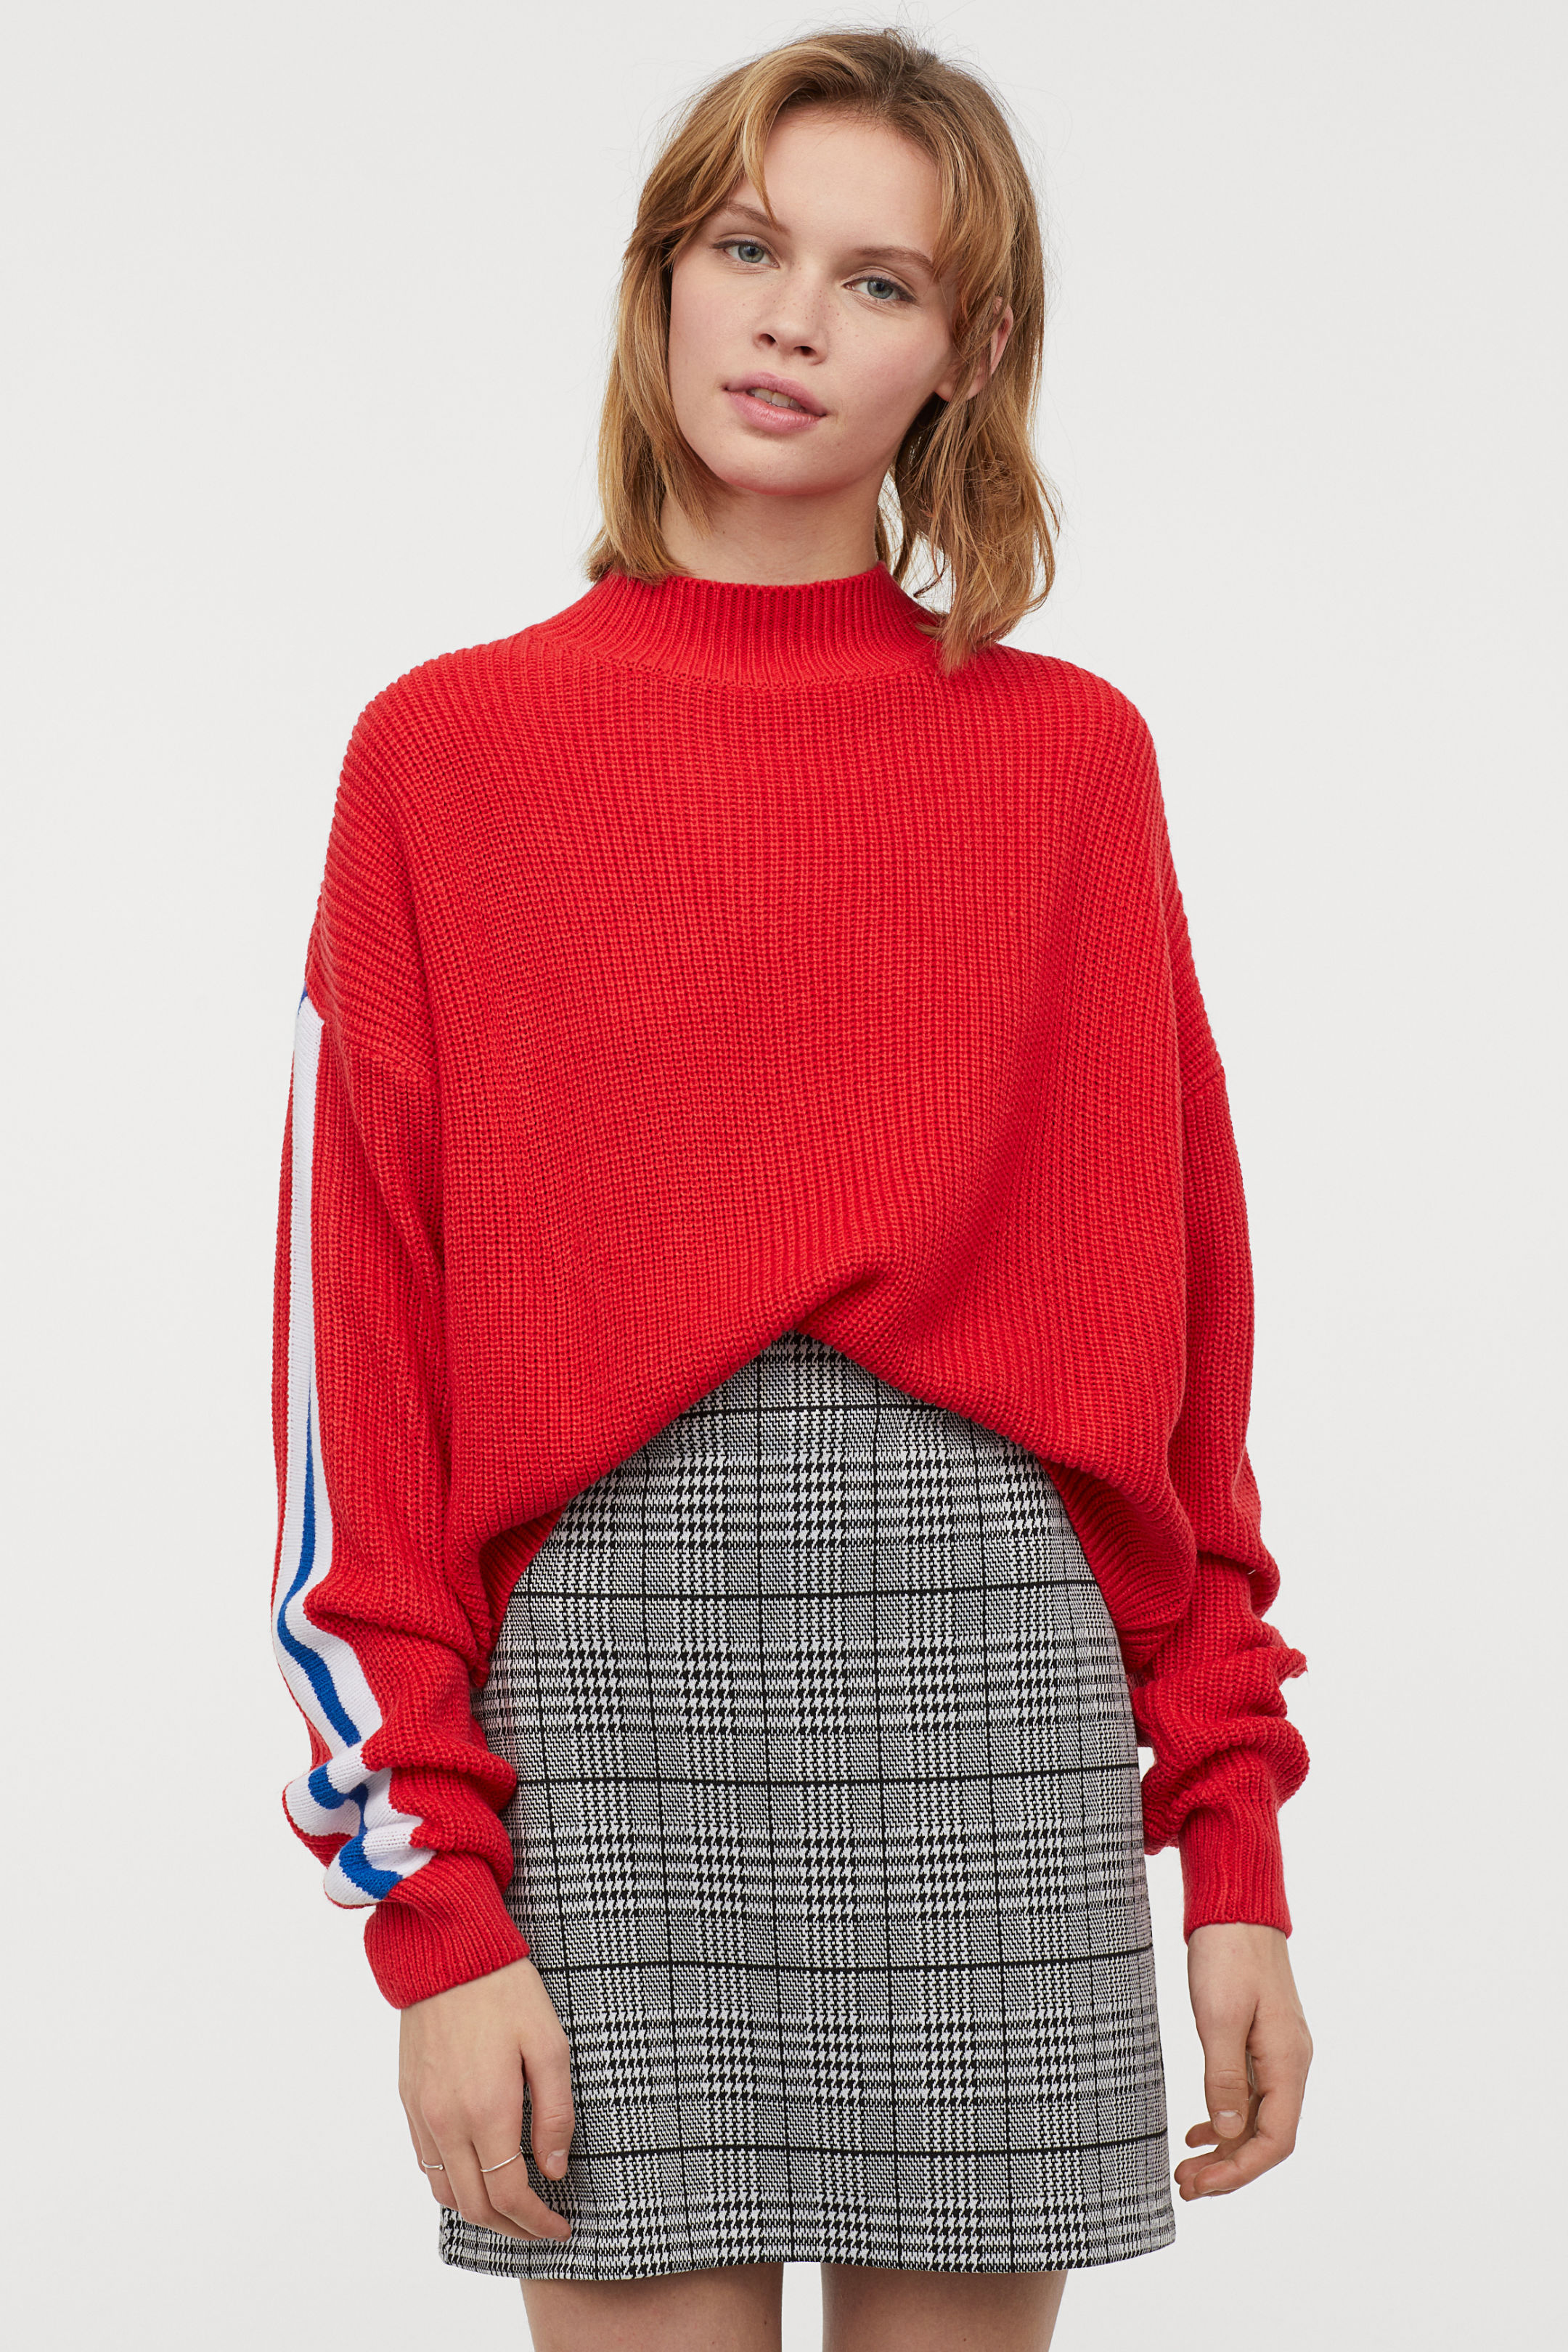  Heavy knit boxy sweater with high neck and stripe detail at sleeve 